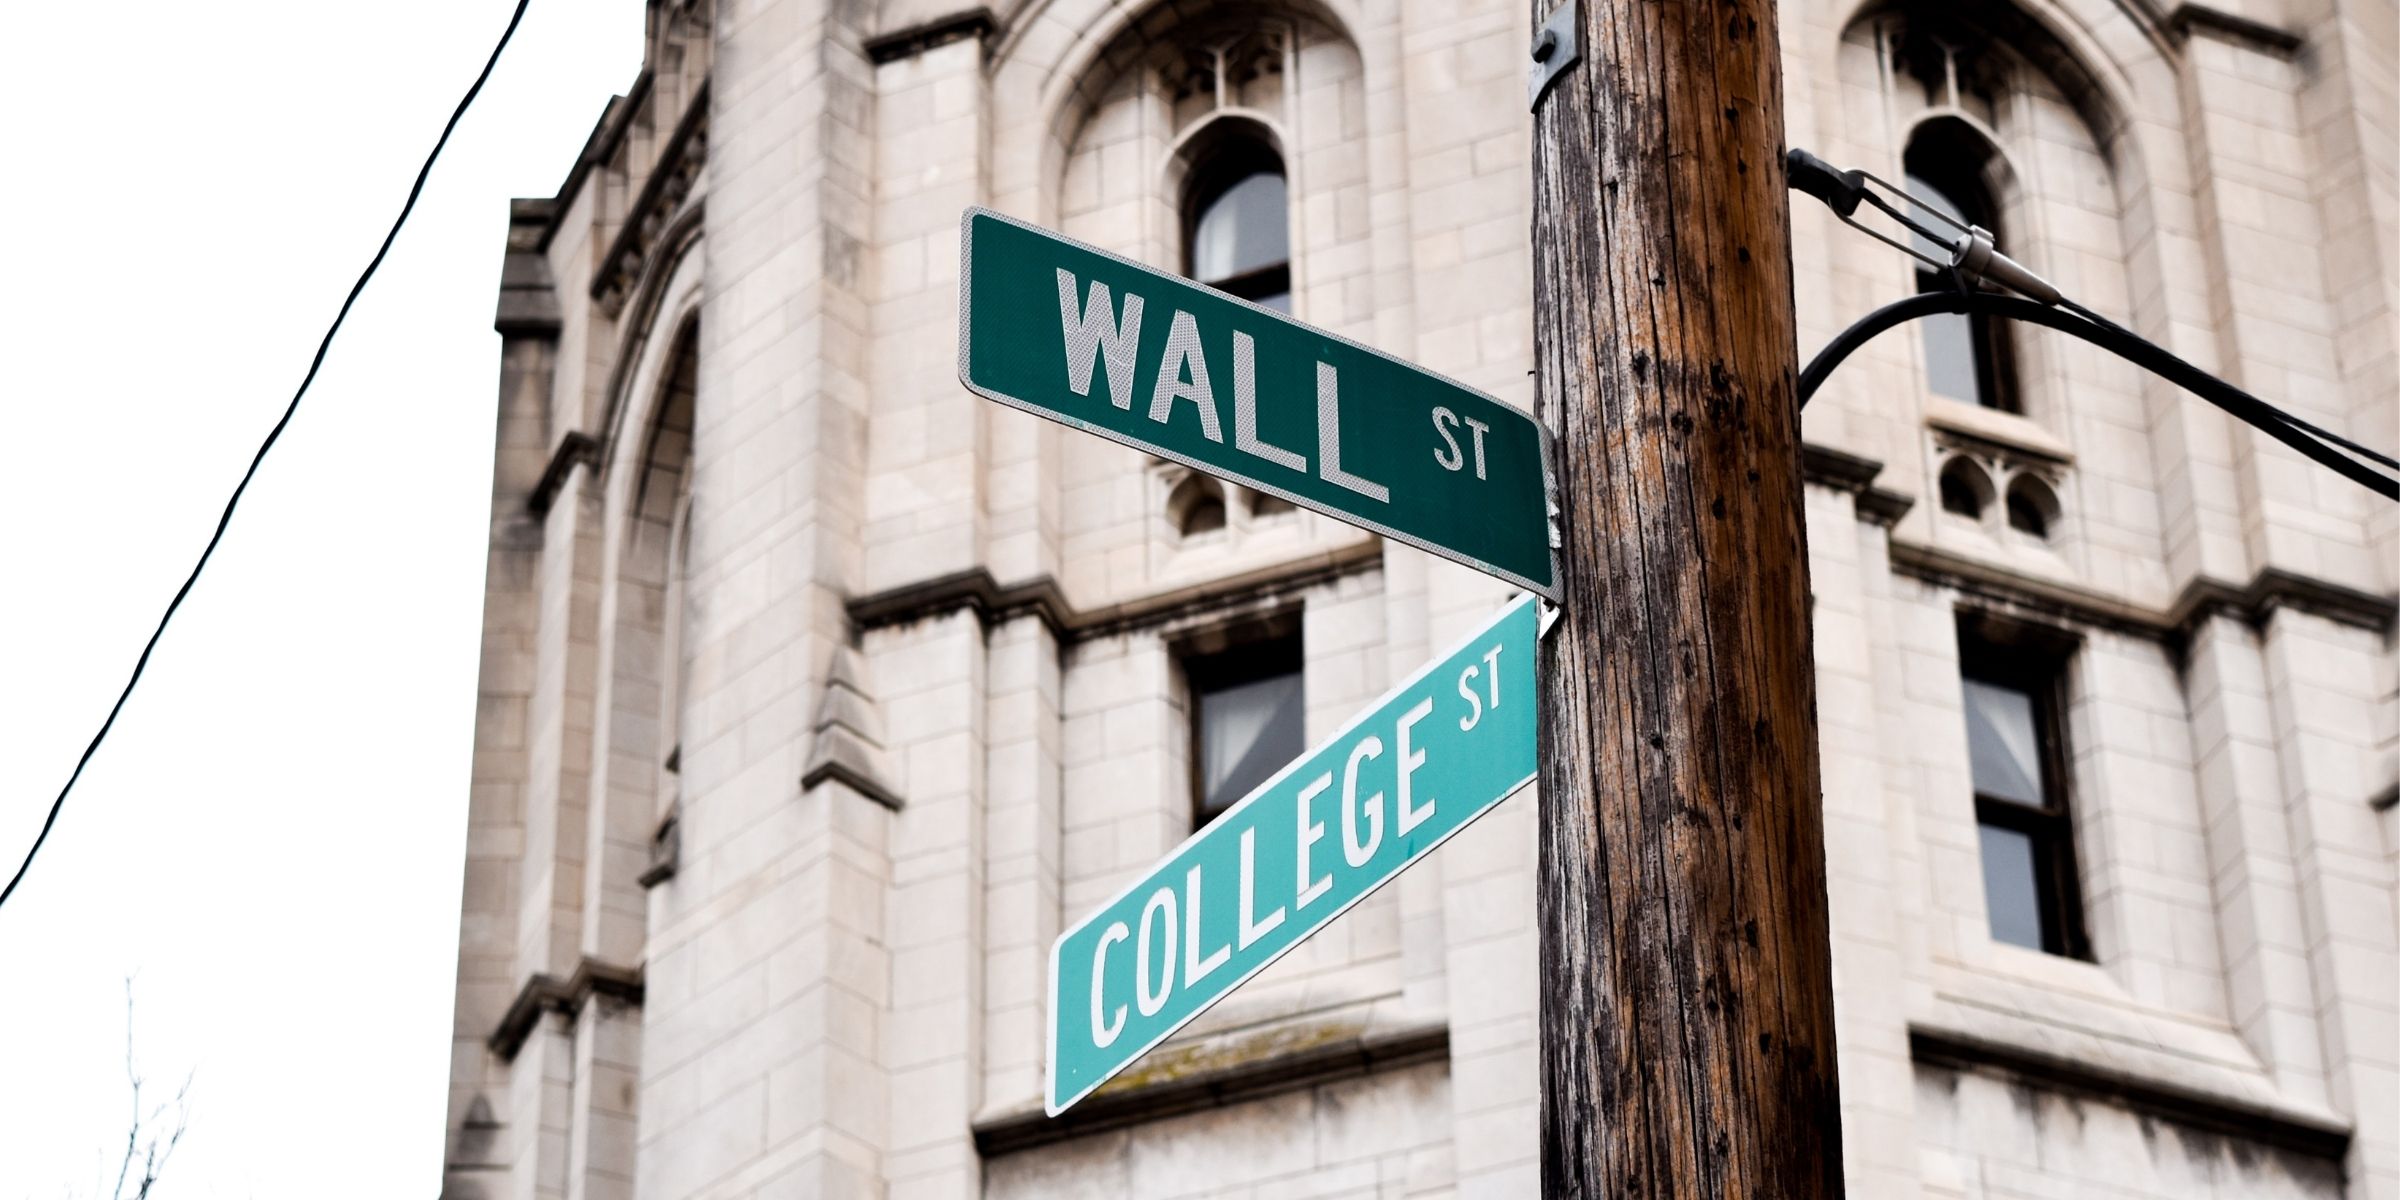 a street cross section with one sign that says College Street and another that says Wall Street